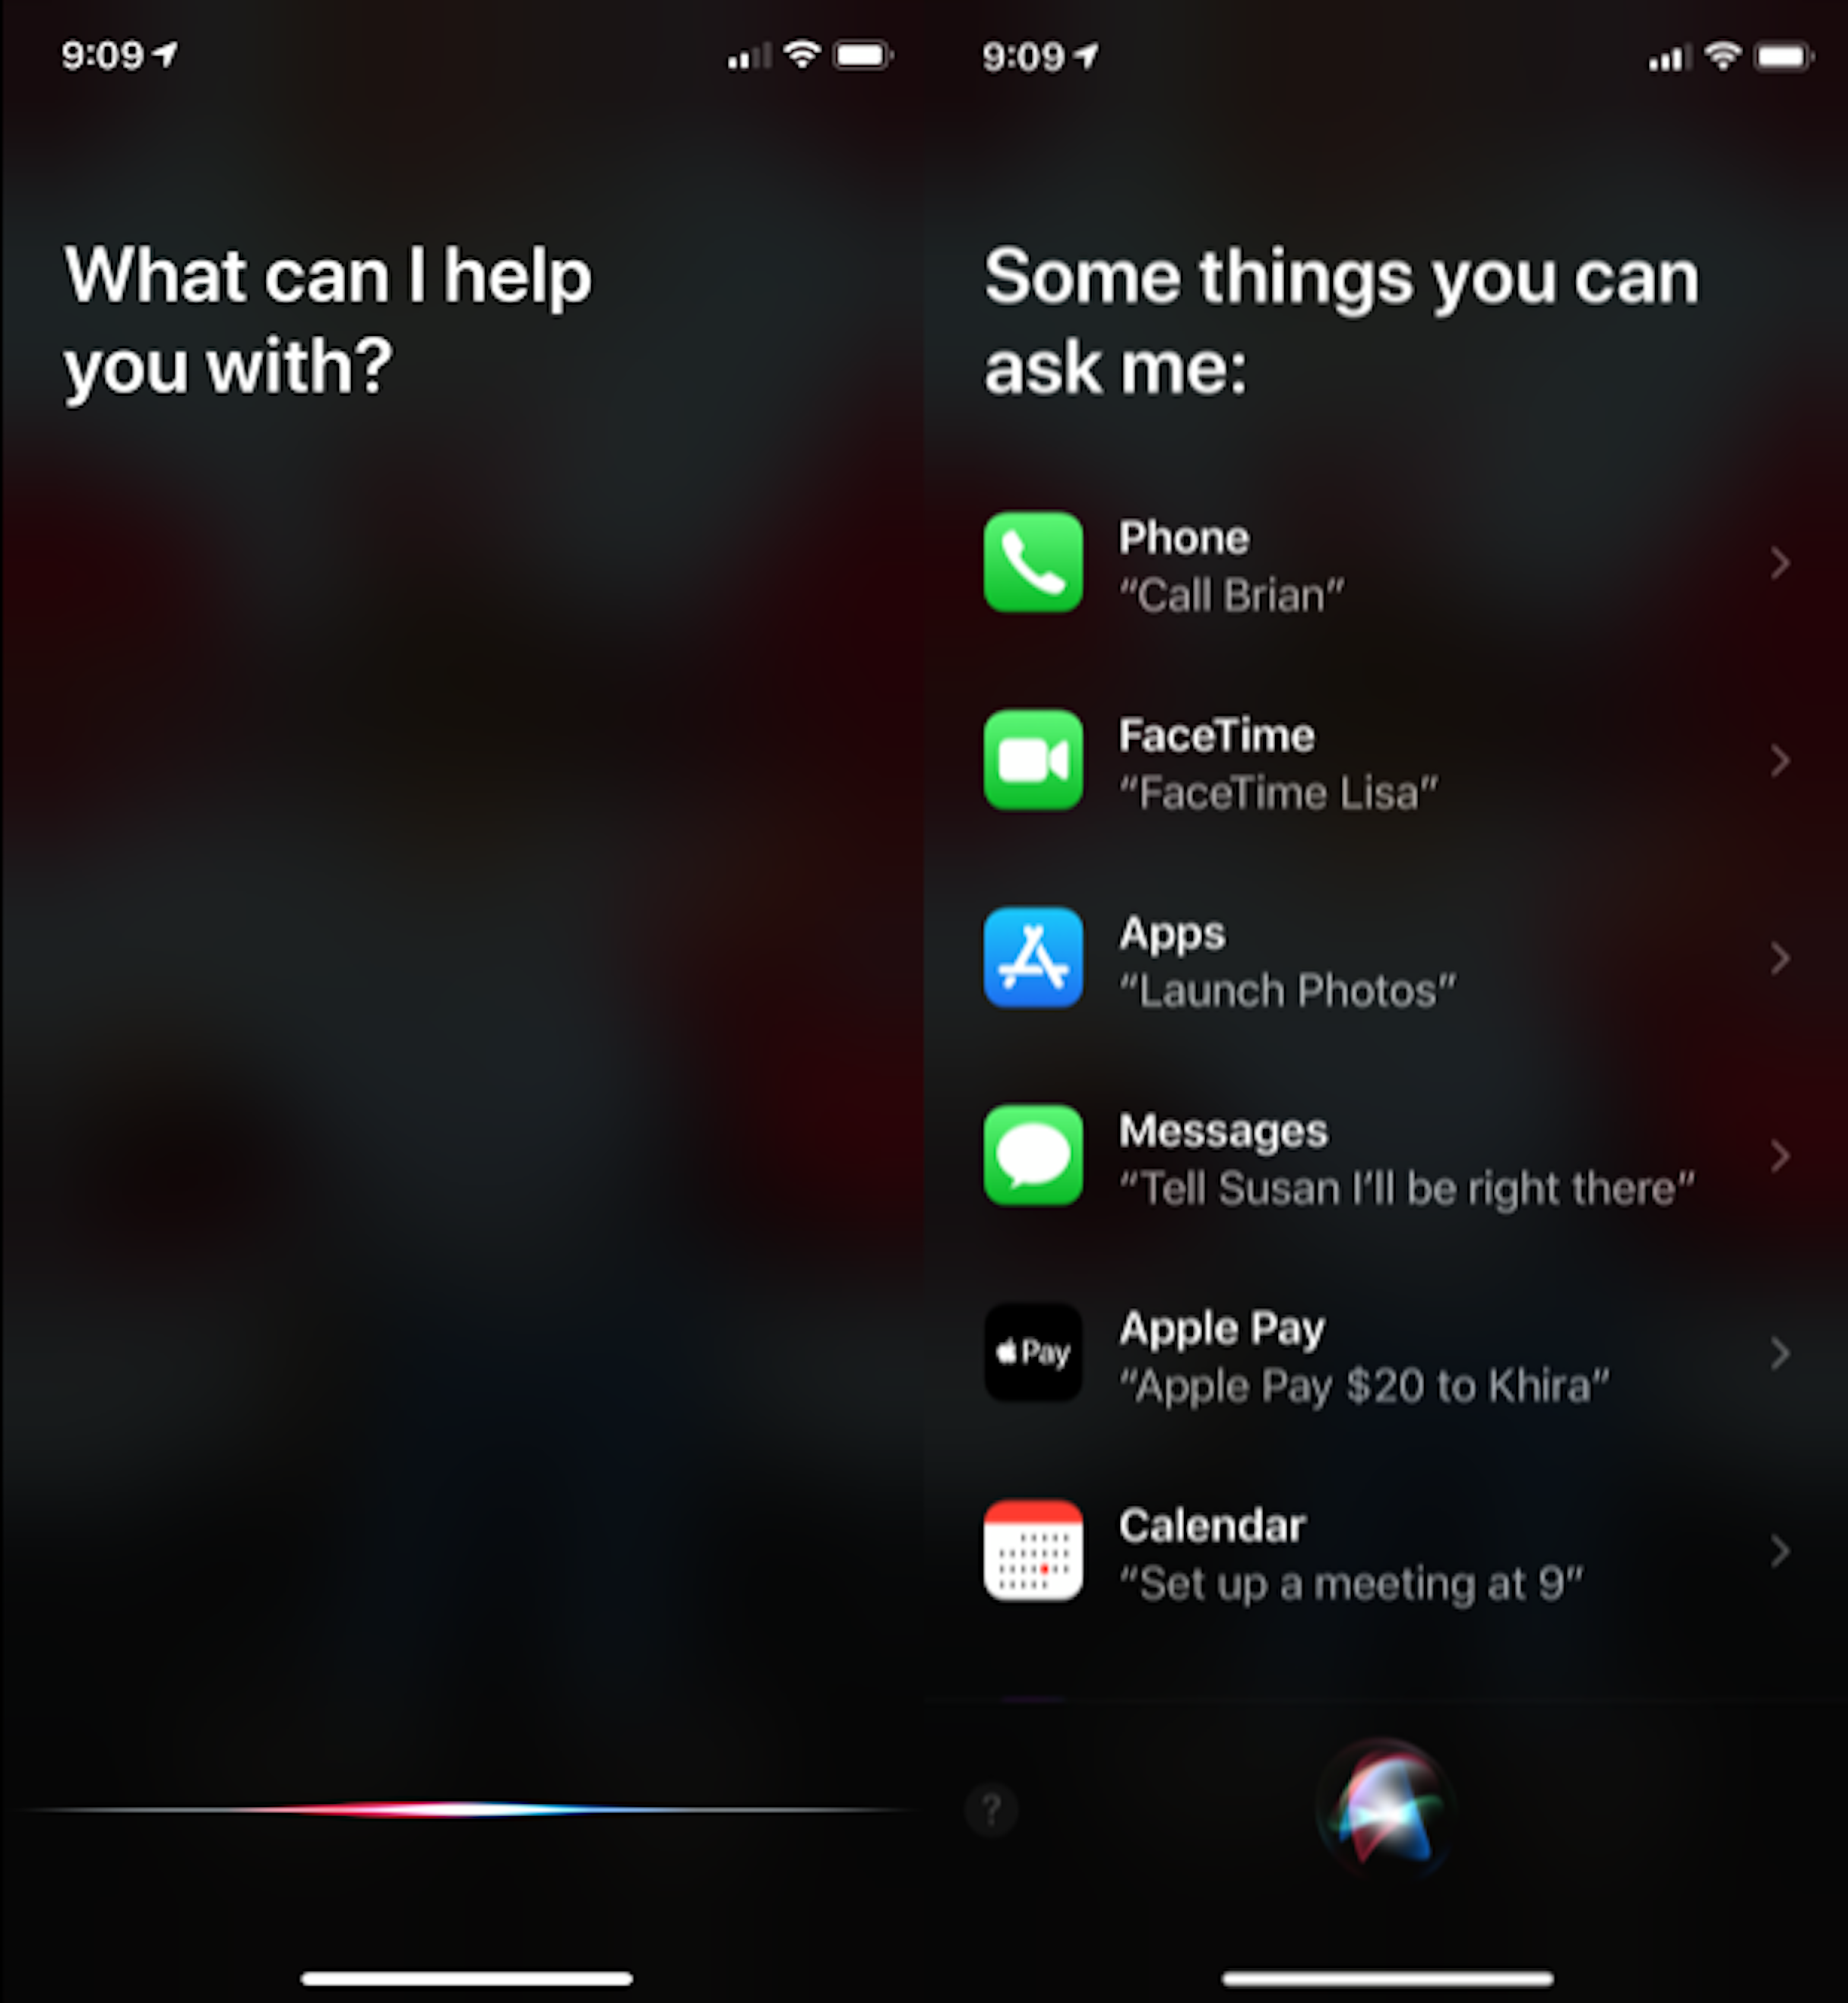 How to use Siri on iPhone, and 5 useful Siri commands